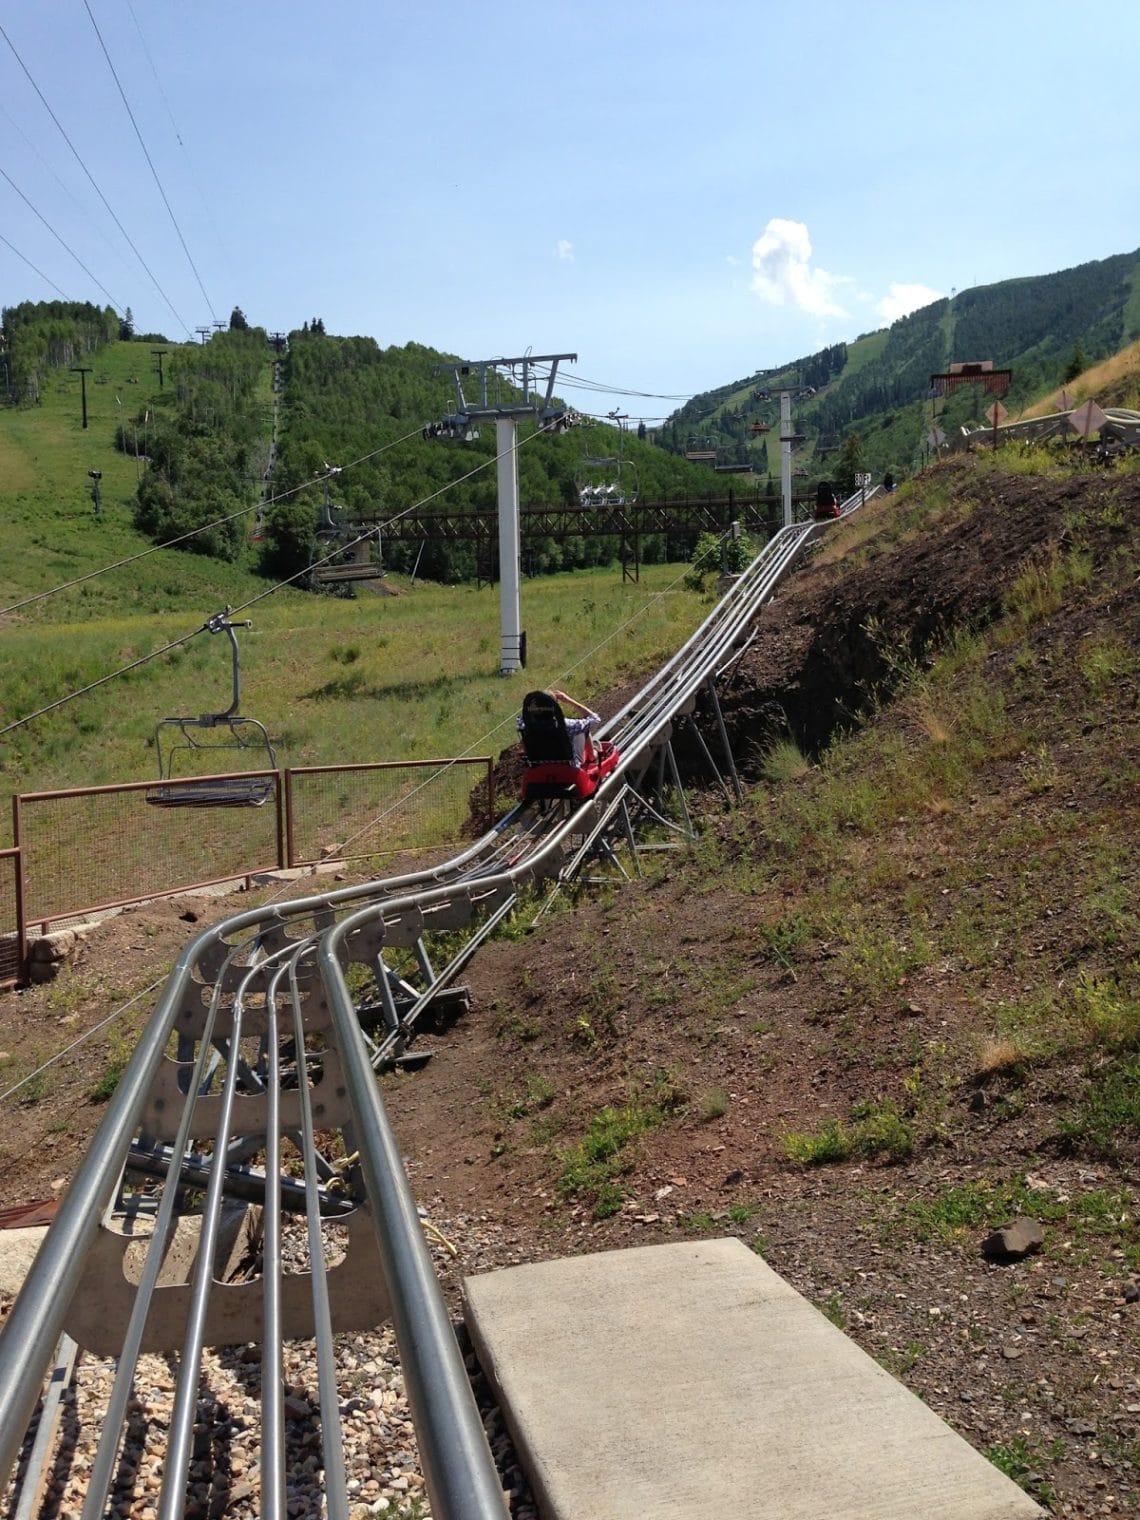 View from the top of the Mountain Coaster, also called the Alpine Coaster, in Park City, Utah. 